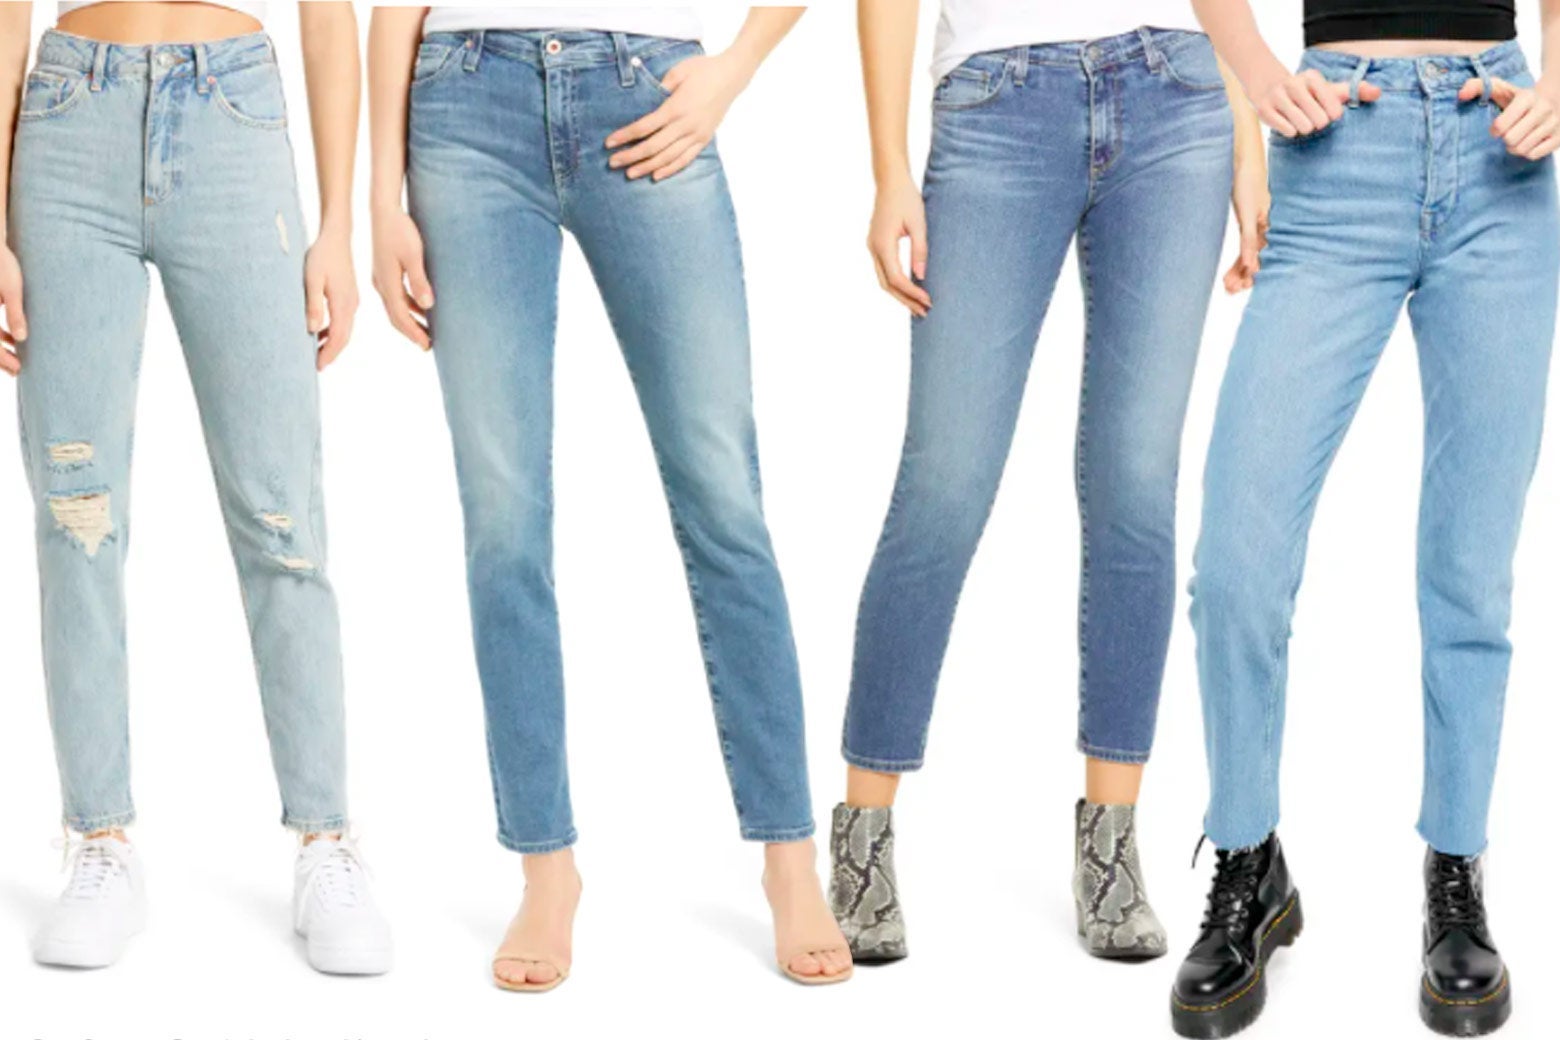 Four different styles of jeans are modeled.